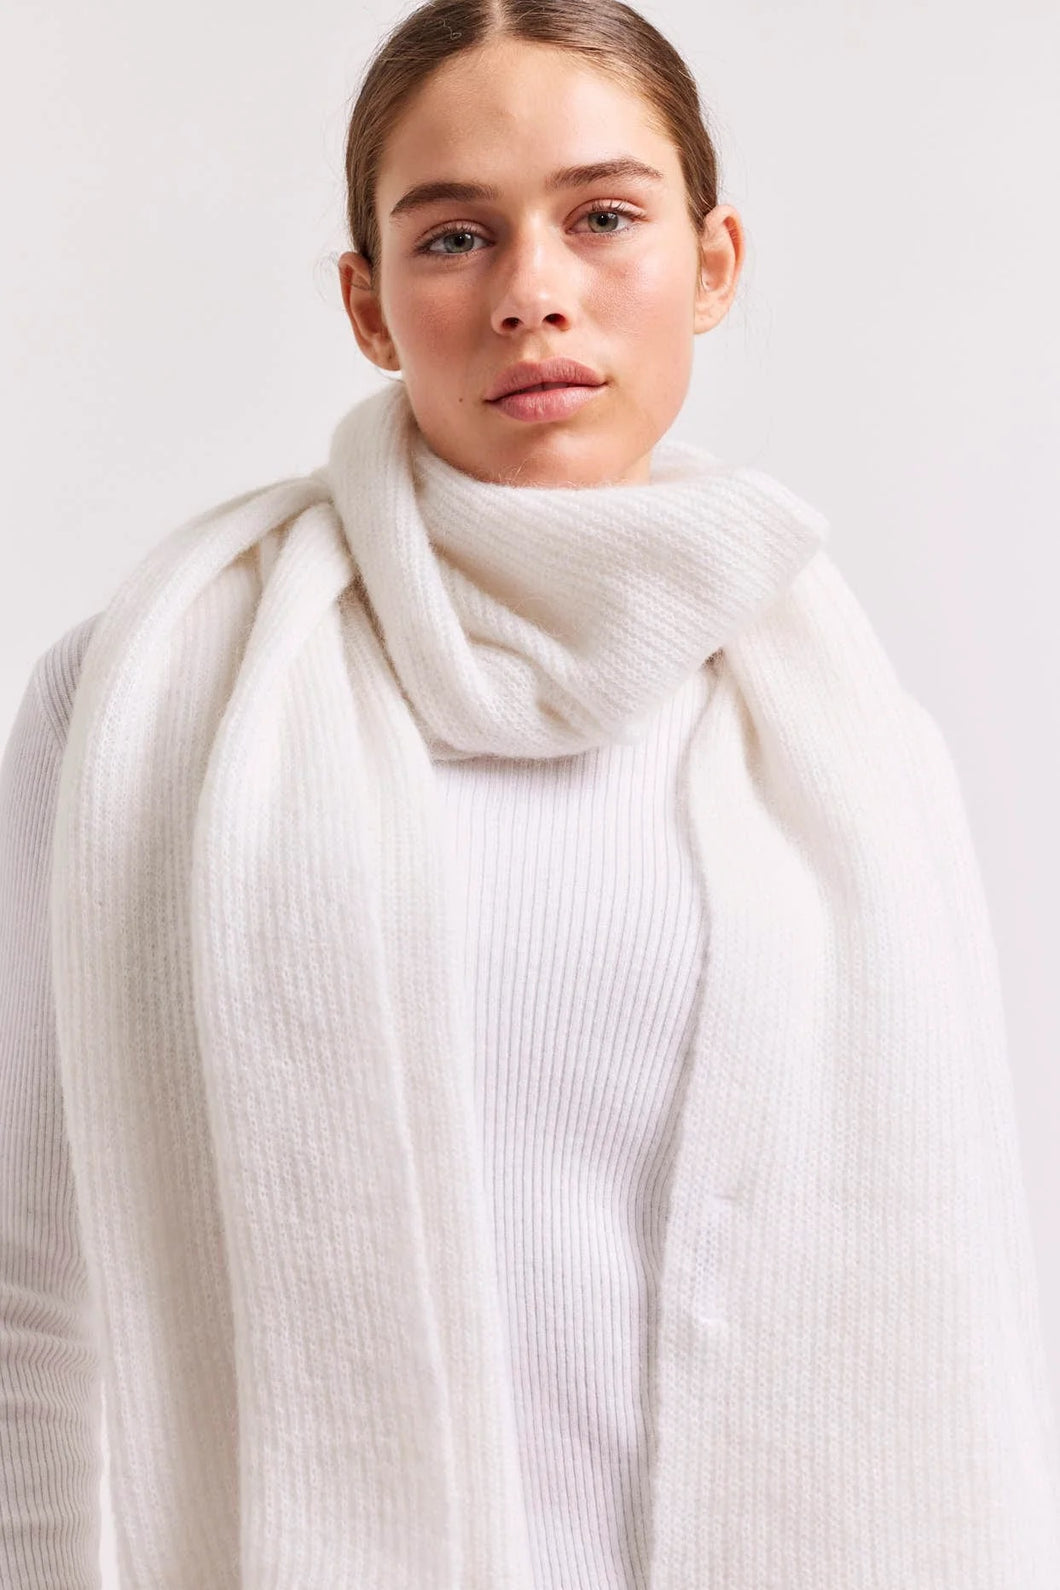 Lola Mohair Scarf in Milk by Alessandra